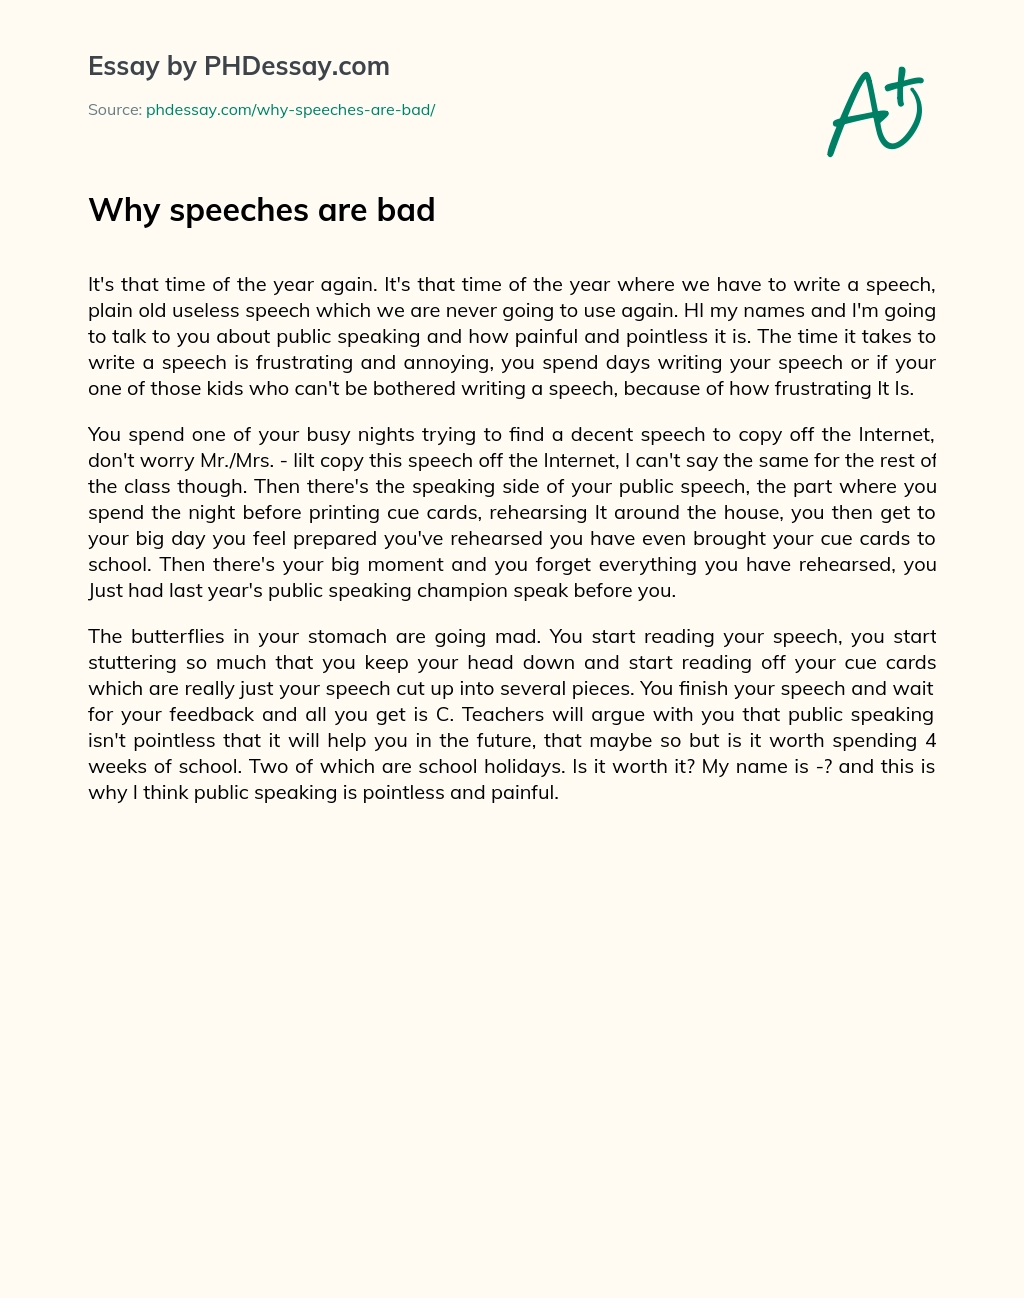 Why speeches are bad essay